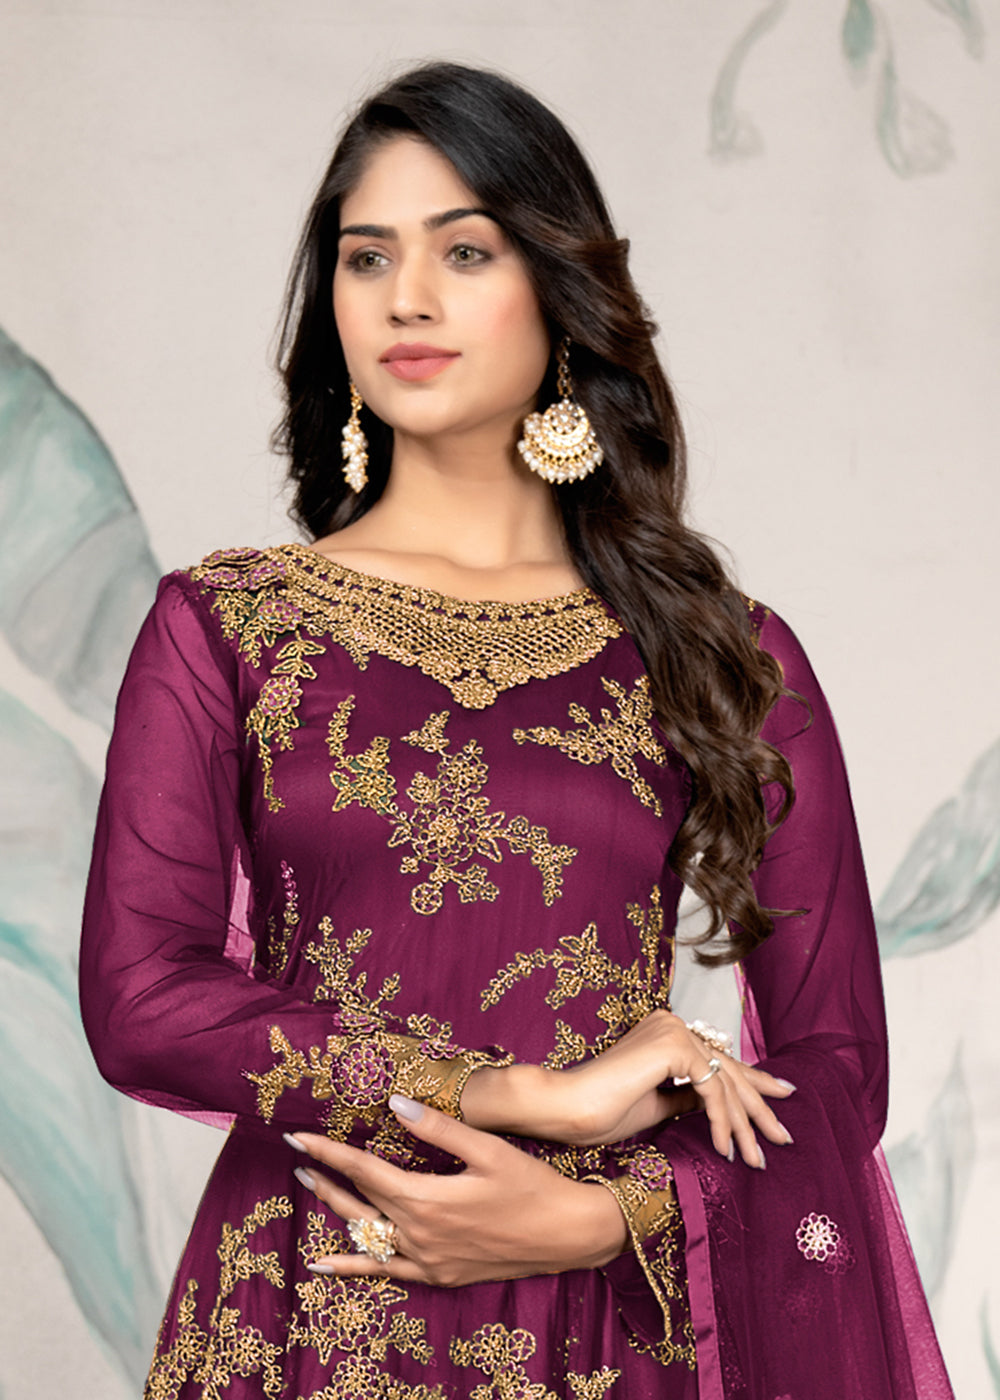 Buy Now Party Wear Magenta Thread & Sequins Work Anarkali Suit Online in USA, UK, Australia, New Zealand, Canada, Italy & Worldwide at Empress Clothing.